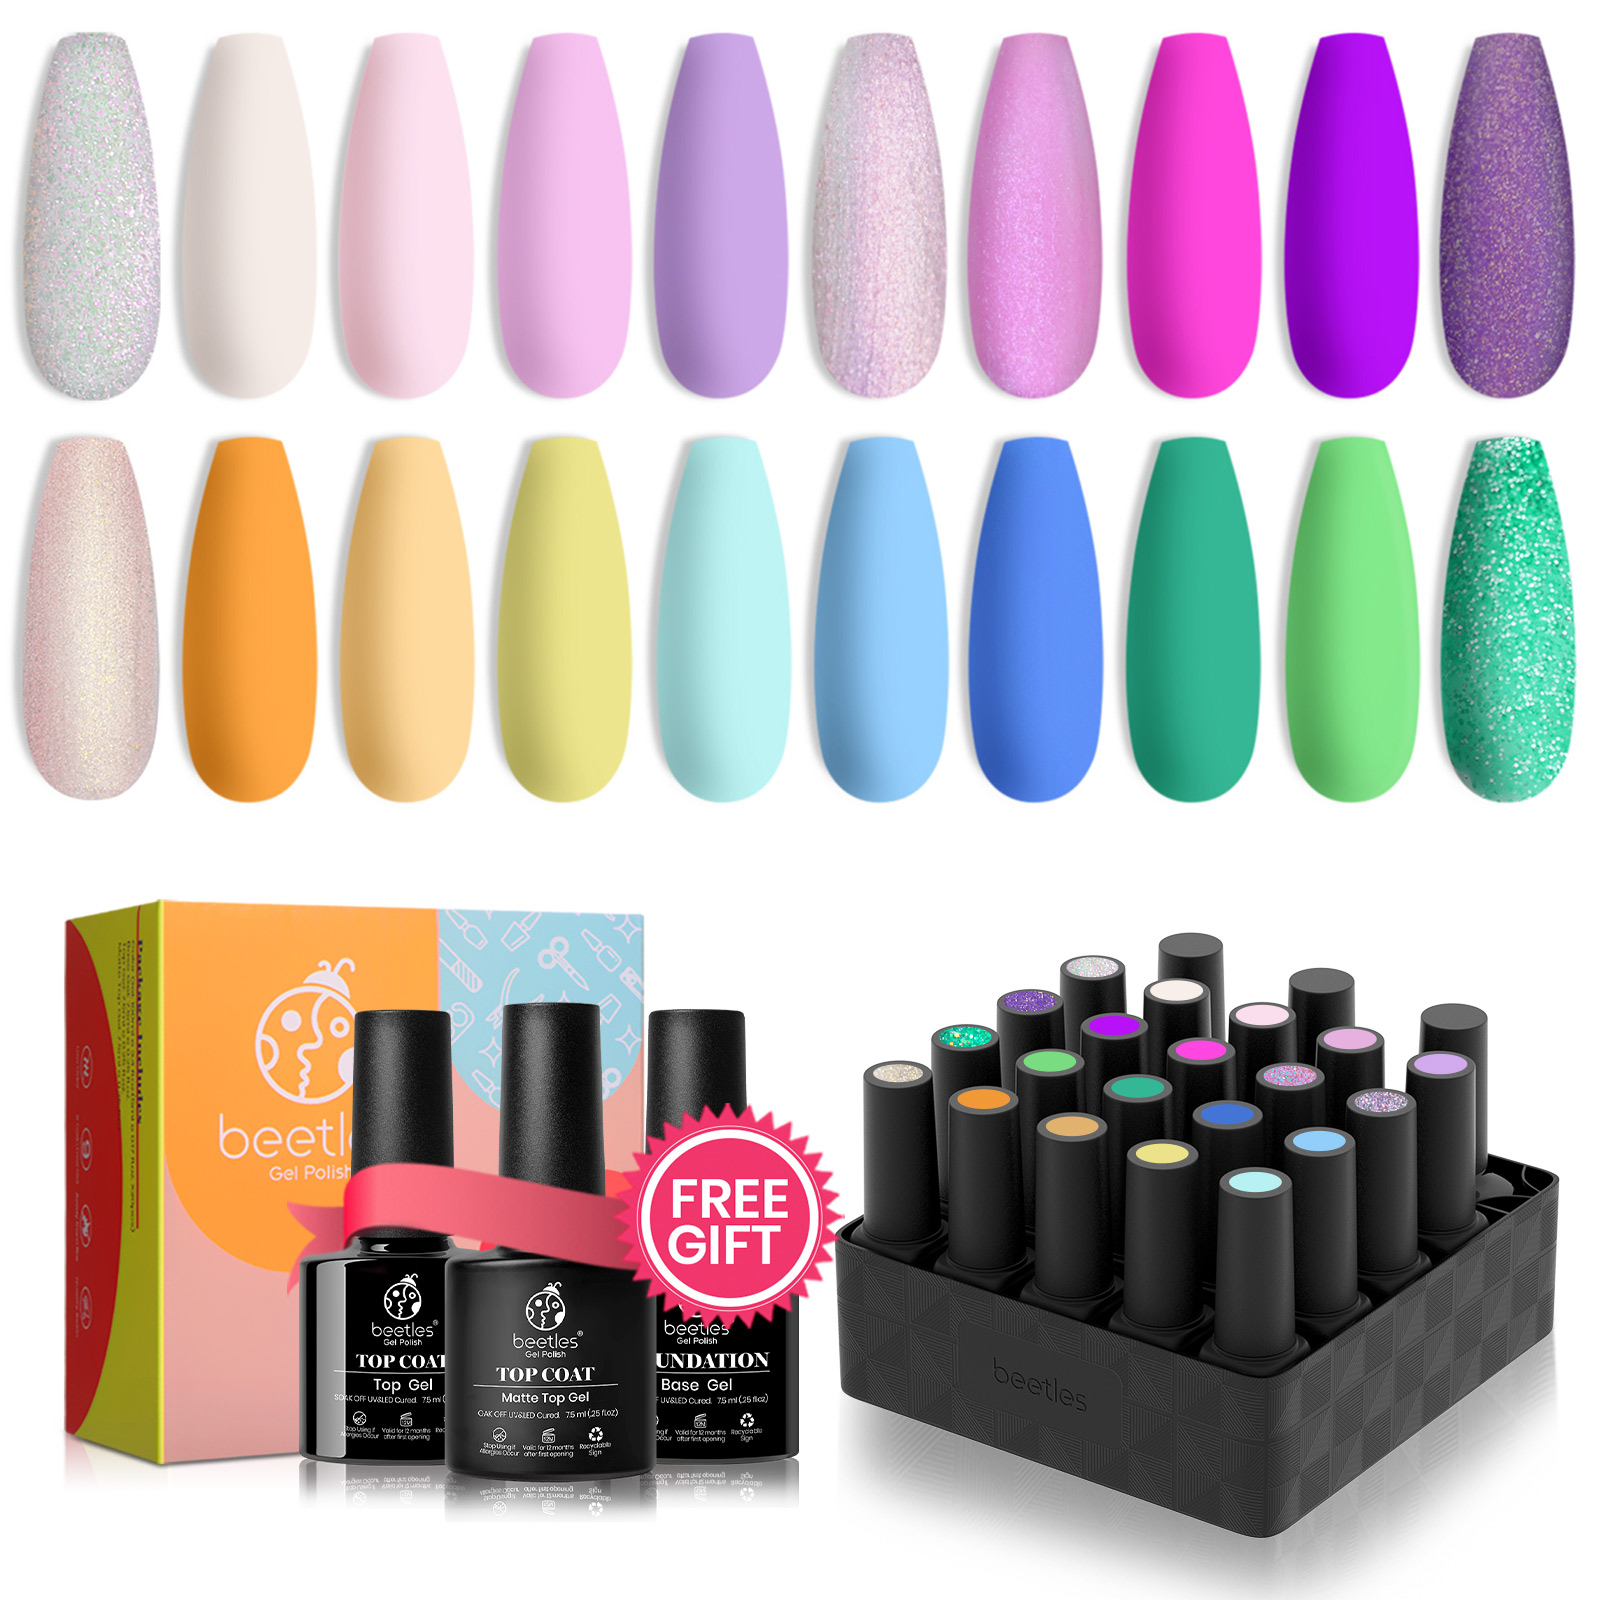 Fantasy land - 20 Gel Colors Set with Top and Base Coat (5ml/Each)